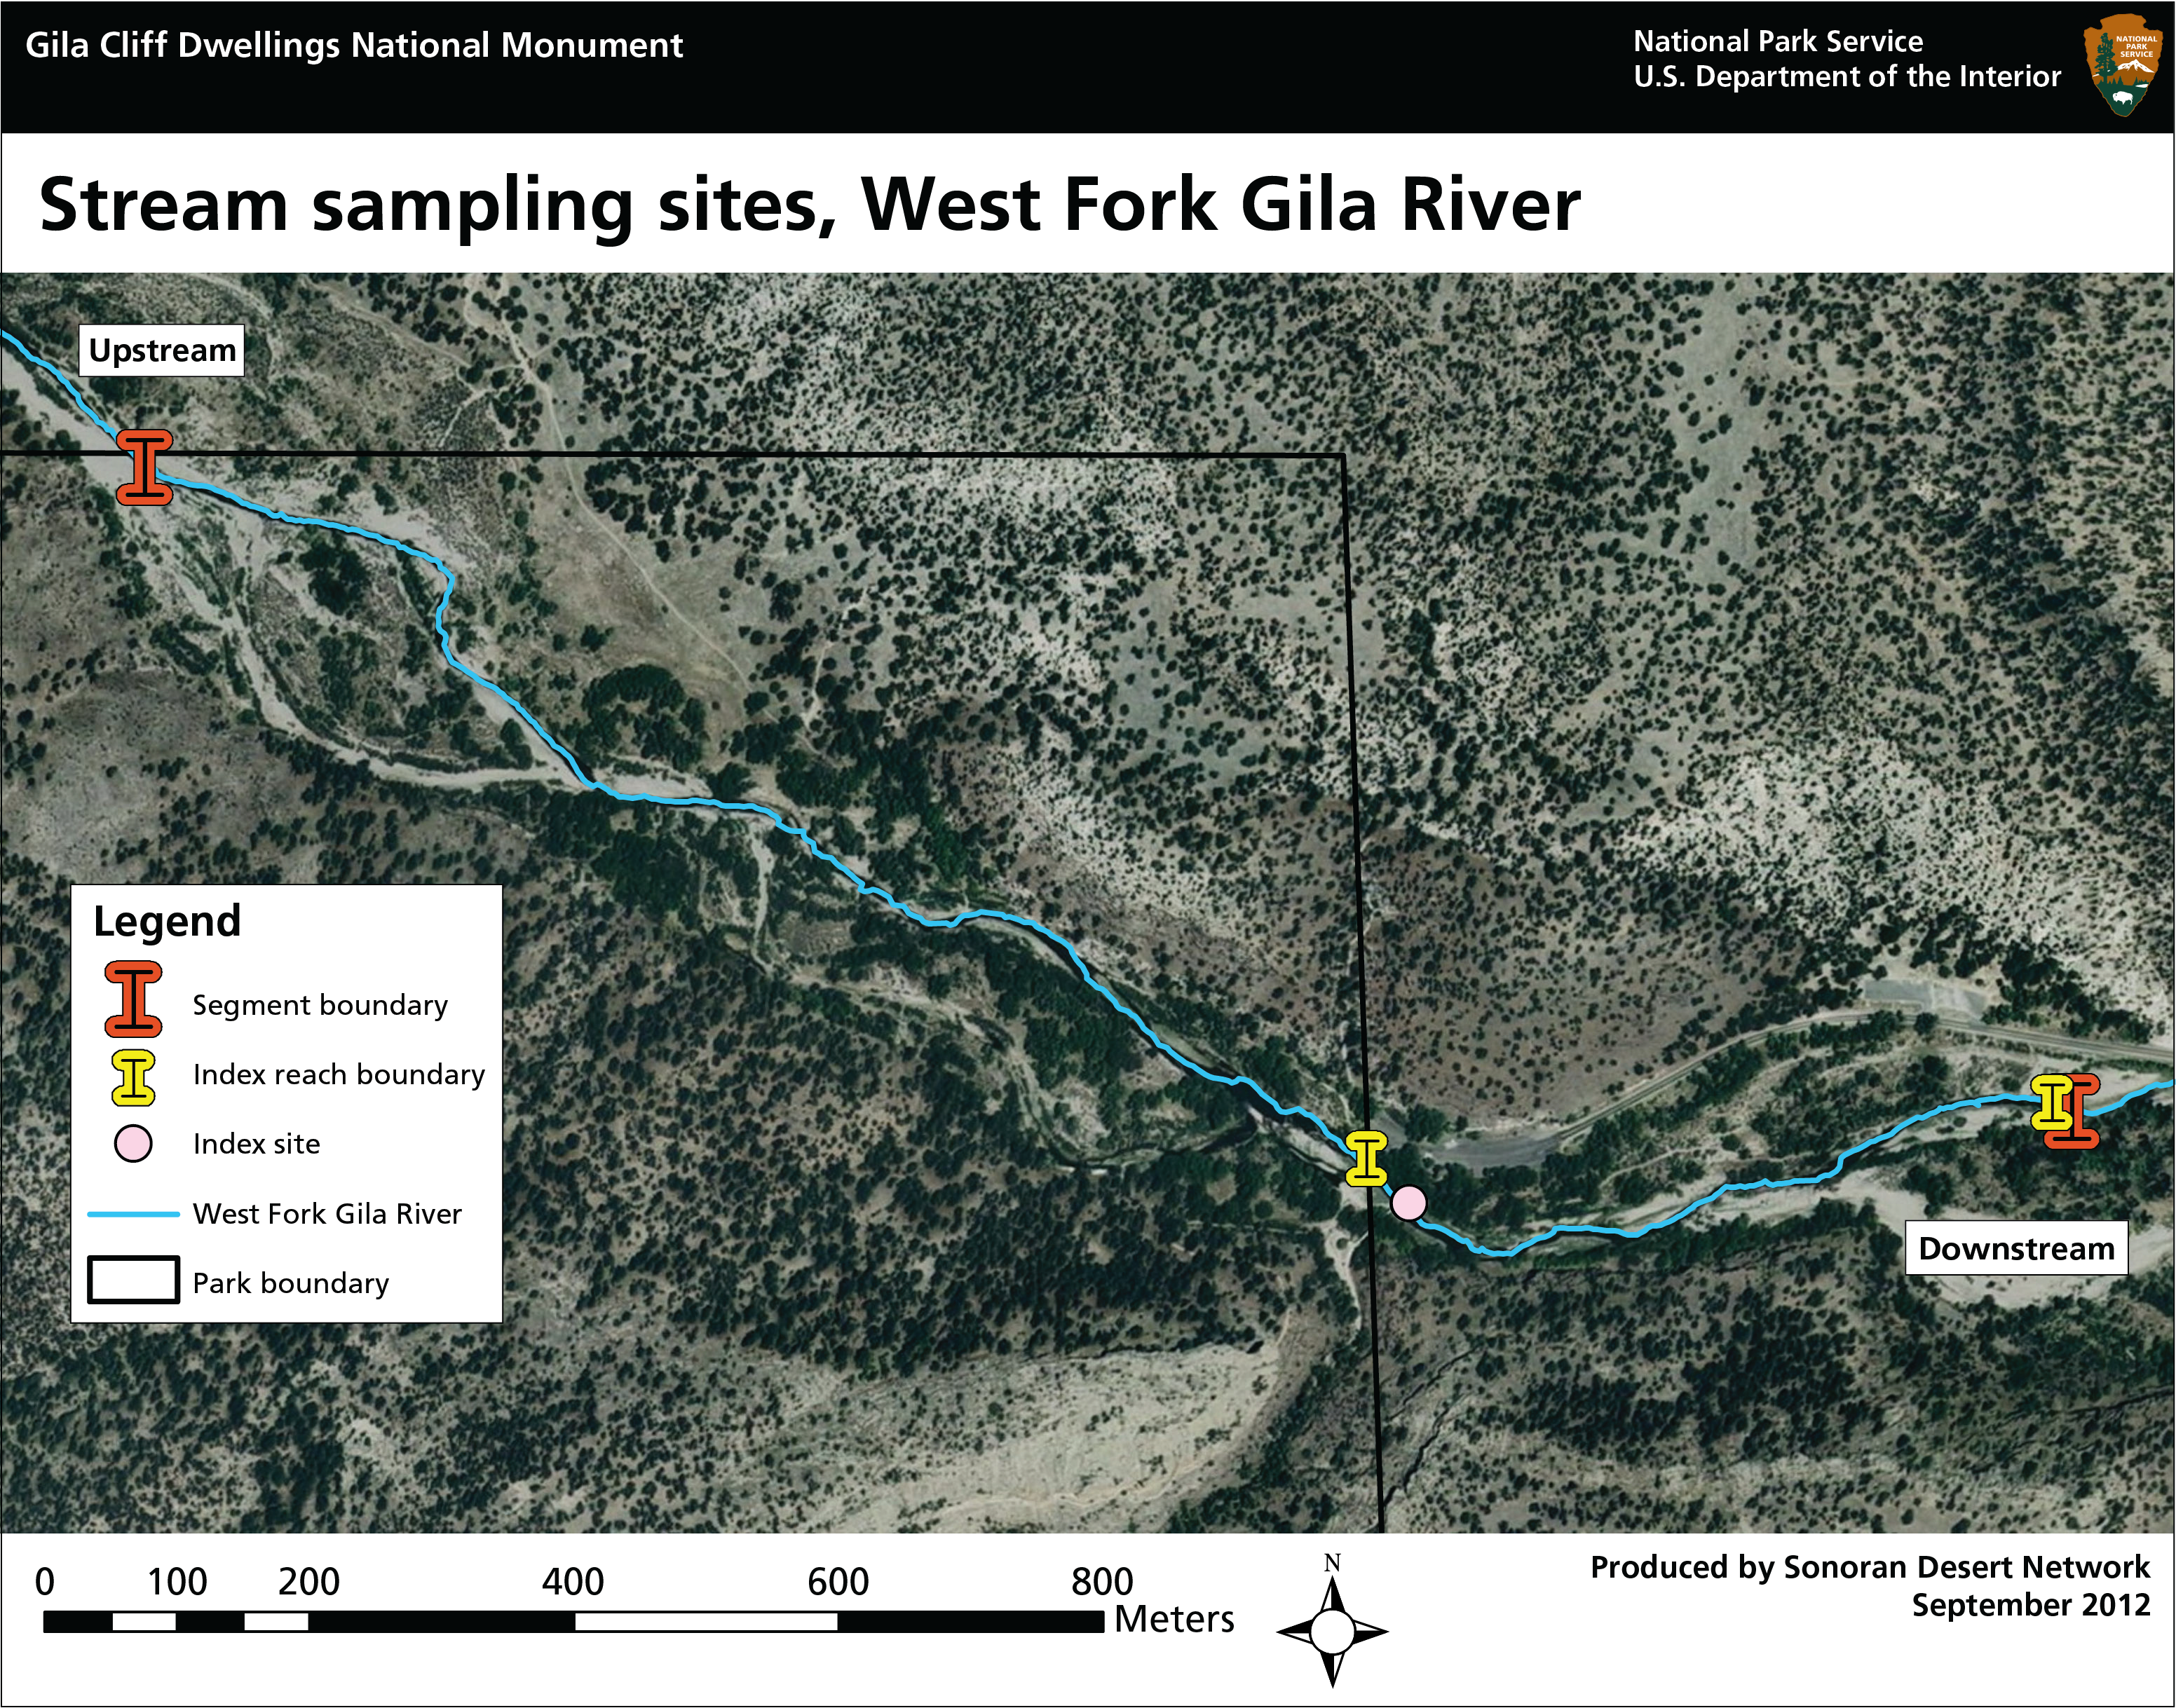 Map showing streams sampling sites on the West Fork Gila River, crossing the northeastern boundary of Gila Cliff Dwellings National Monument.